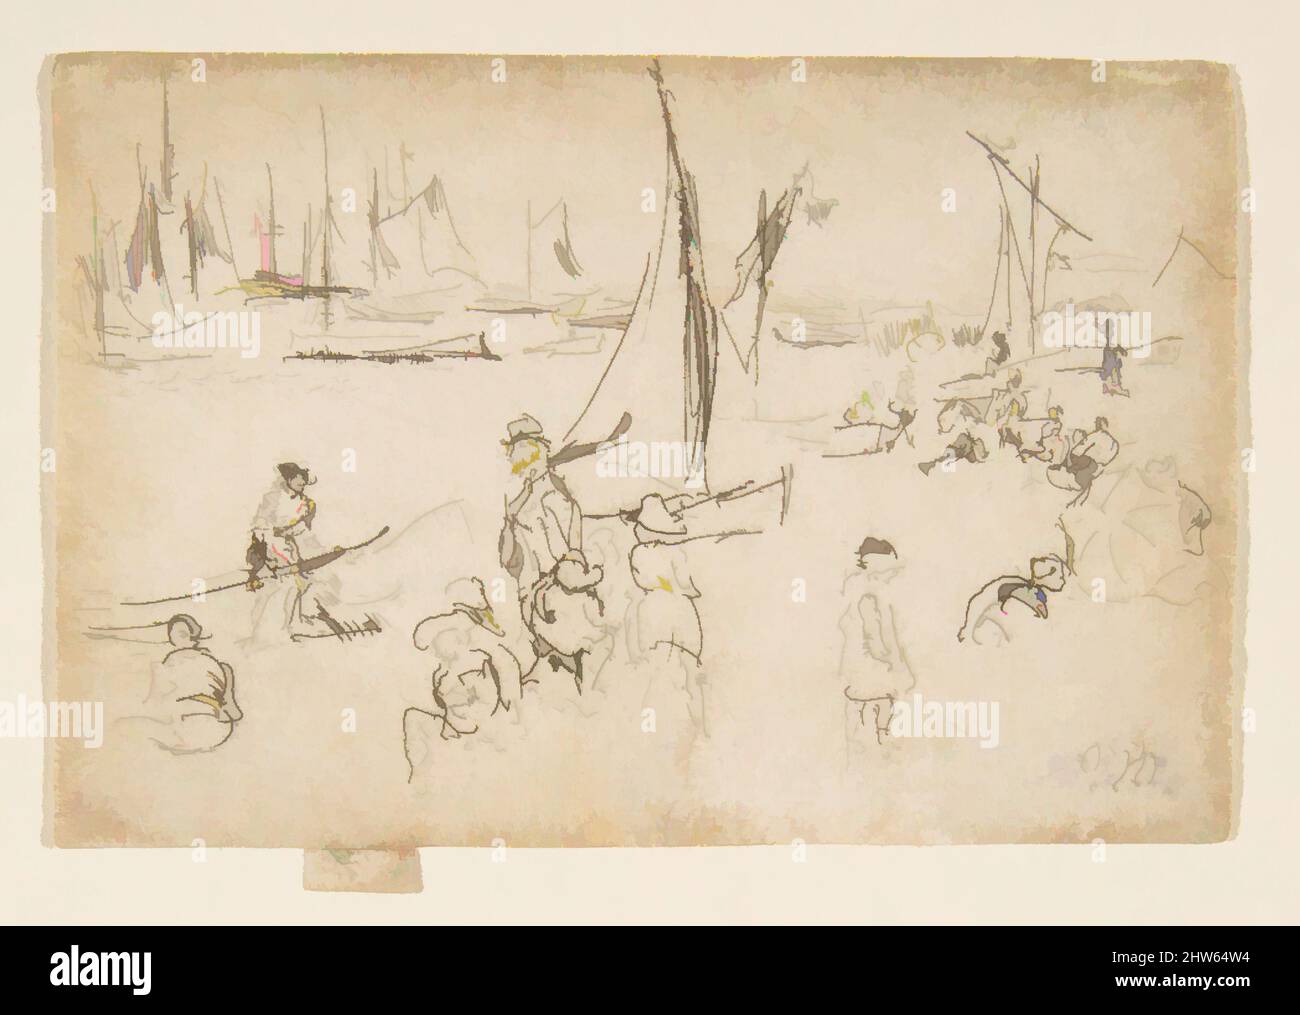 Art inspired by Portsmouth Children (Children, Portsmouth), 1887, Etching; only state (Glasgow); printed in black ink on ivory laid paper, Plate: 2 5/8 × 3 7/8 in. (6.6 × 9.9 cm), Prints, James McNeill Whistler (American, Lowell, Massachusetts 1834–1903 London, Classic works modernized by Artotop with a splash of modernity. Shapes, color and value, eye-catching visual impact on art. Emotions through freedom of artworks in a contemporary way. A timeless message pursuing a wildly creative new direction. Artists turning to the digital medium and creating the Artotop NFT Stock Photo